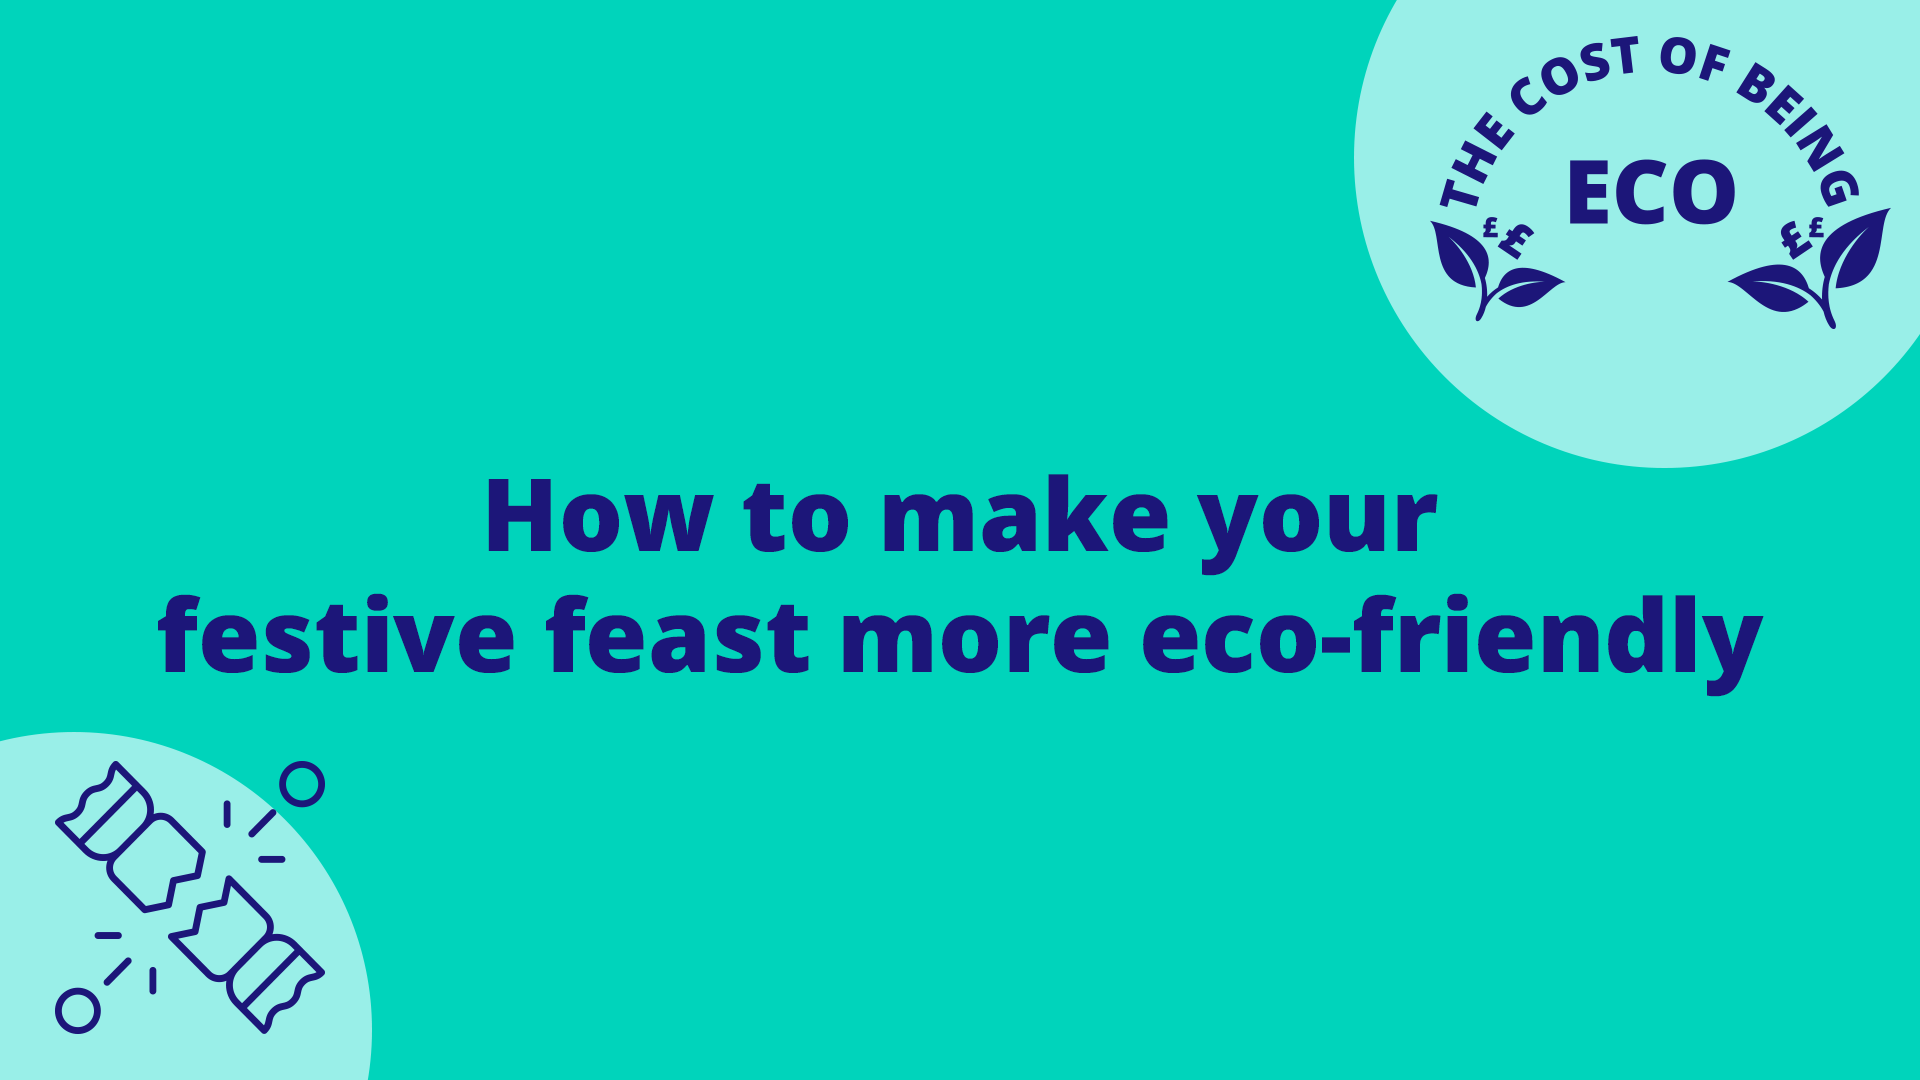 the-cost-of-being-eco-how-to-make-your-festive-feast-more-eco-friendly